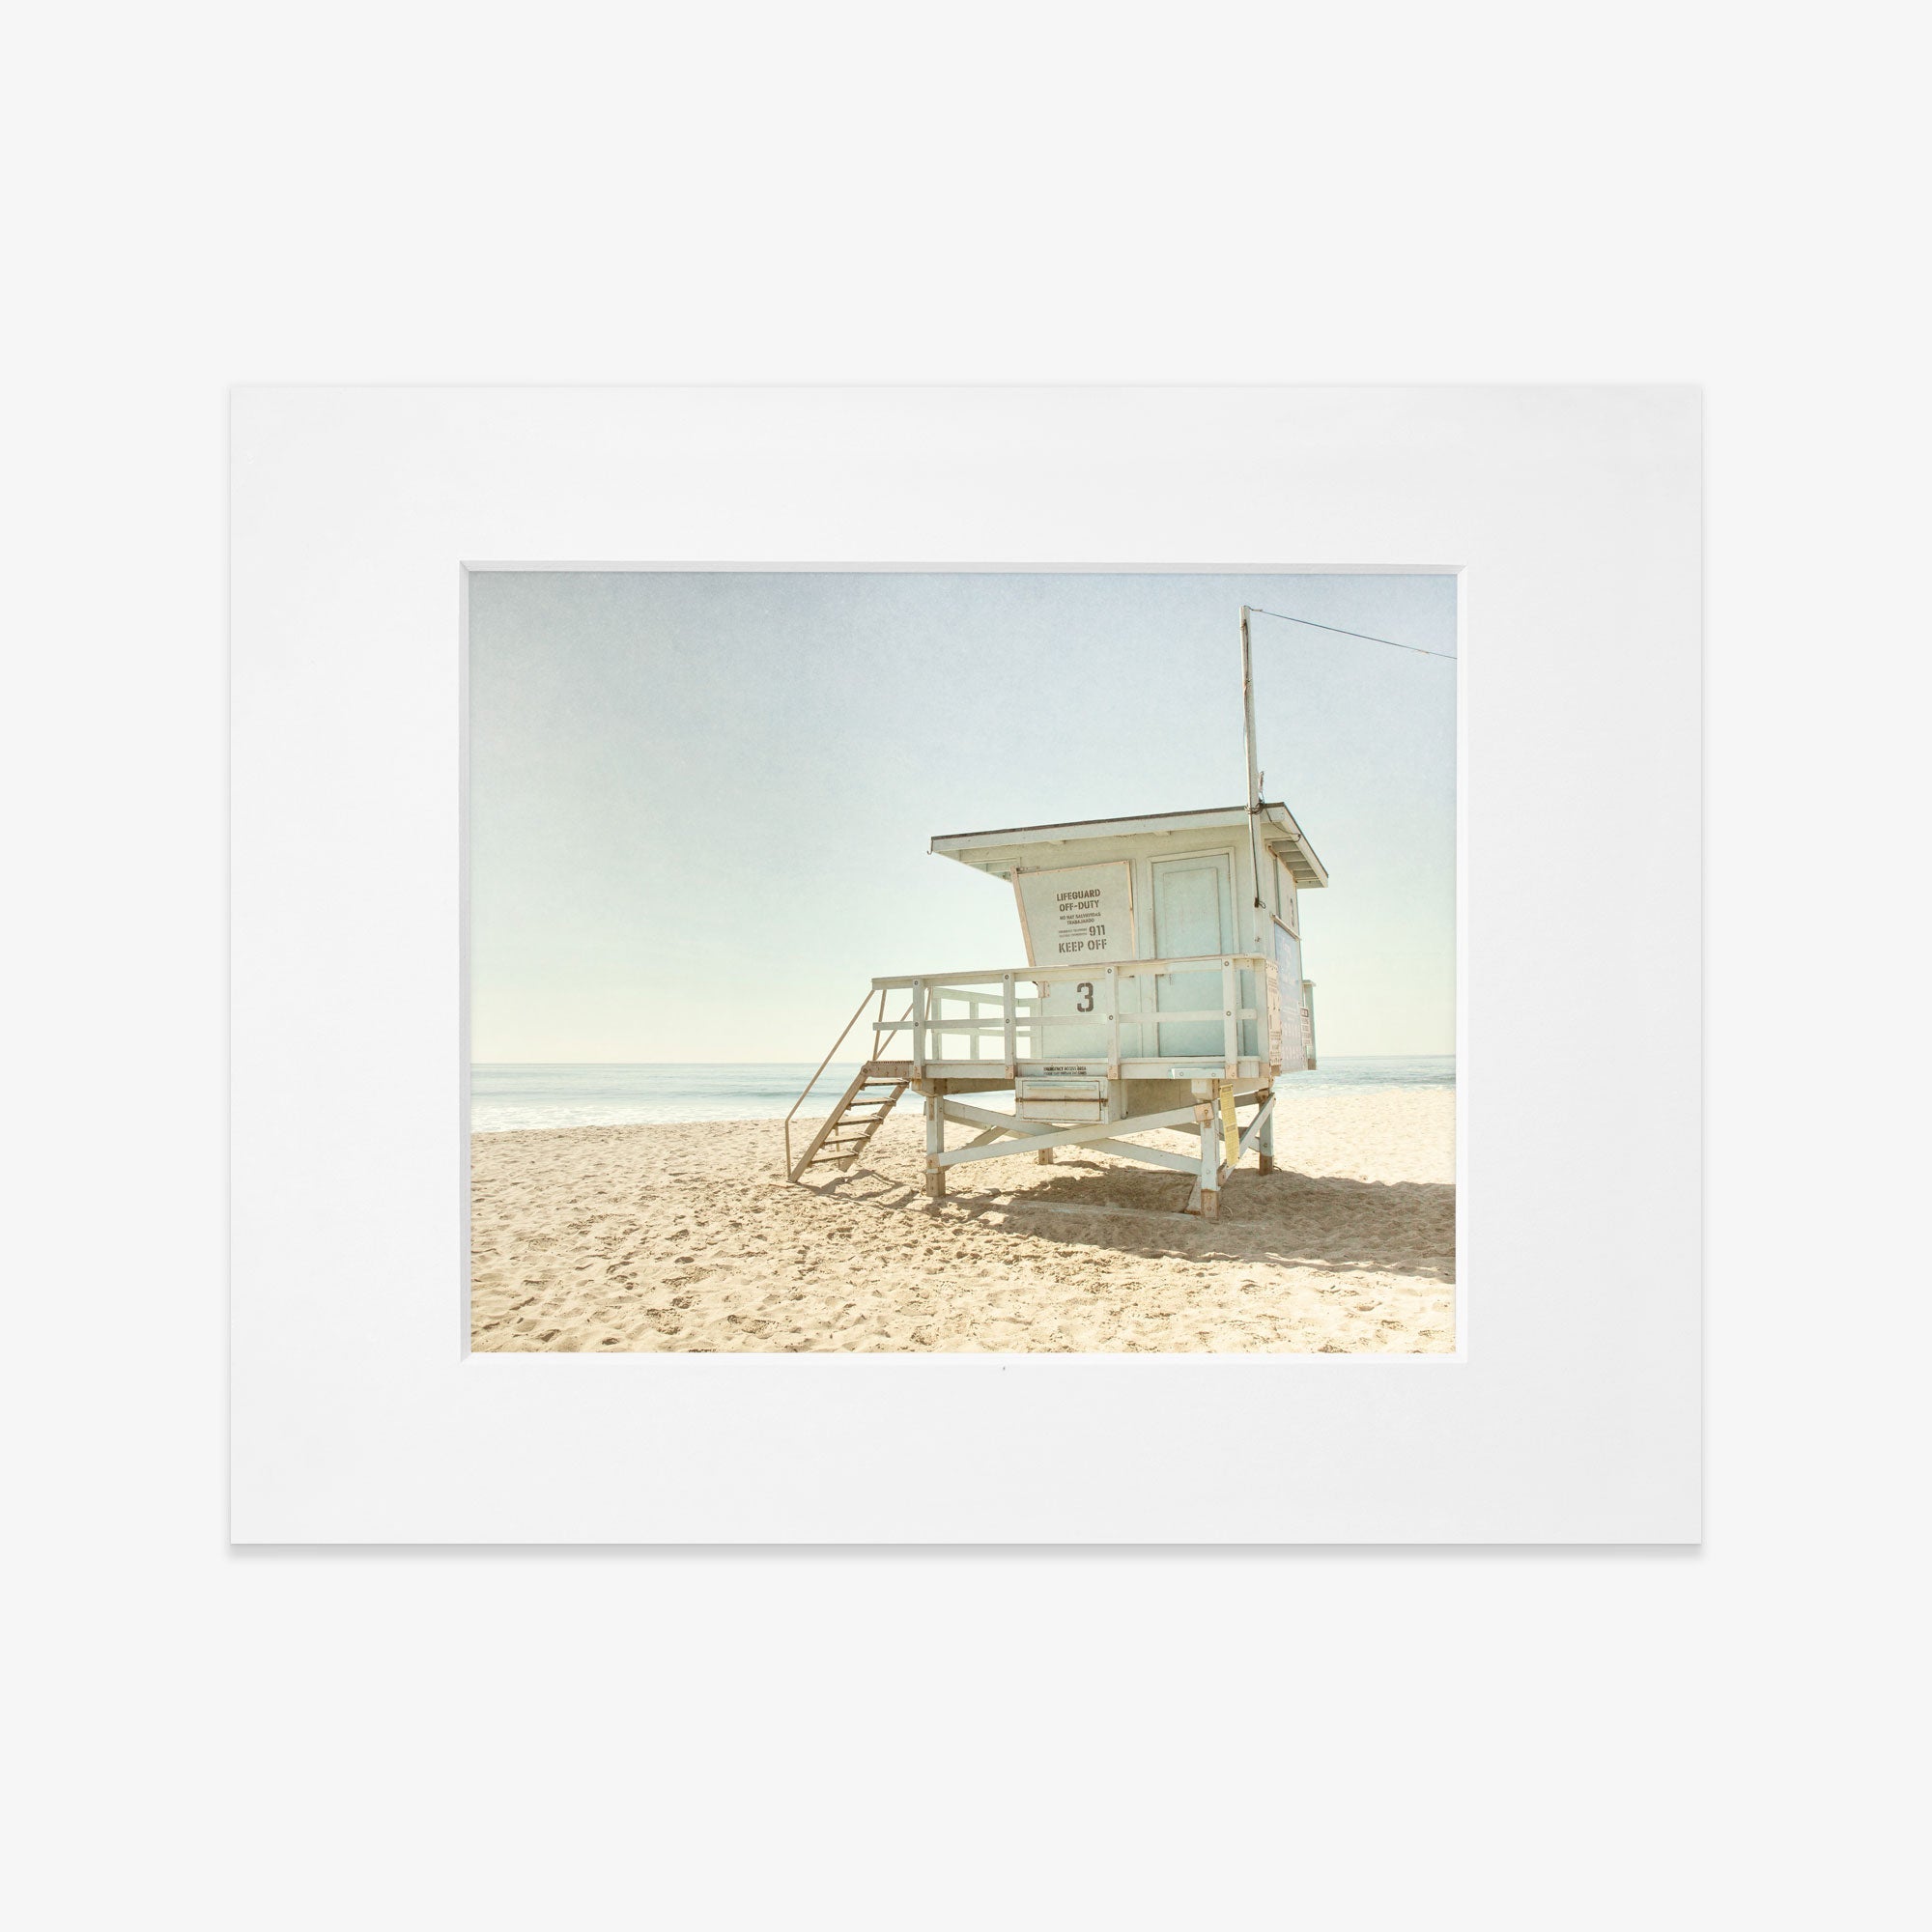 A vintage-style image of a white lifeguard tower in Malibu, number 3, situated on a sandy beach against a clear sky. The scene is tranquil with no people visible, emphasizing solitude. This is Offley Green&#39;s California Summer Beach Art, &#39;Malibu Lifeguard Tower&#39;.